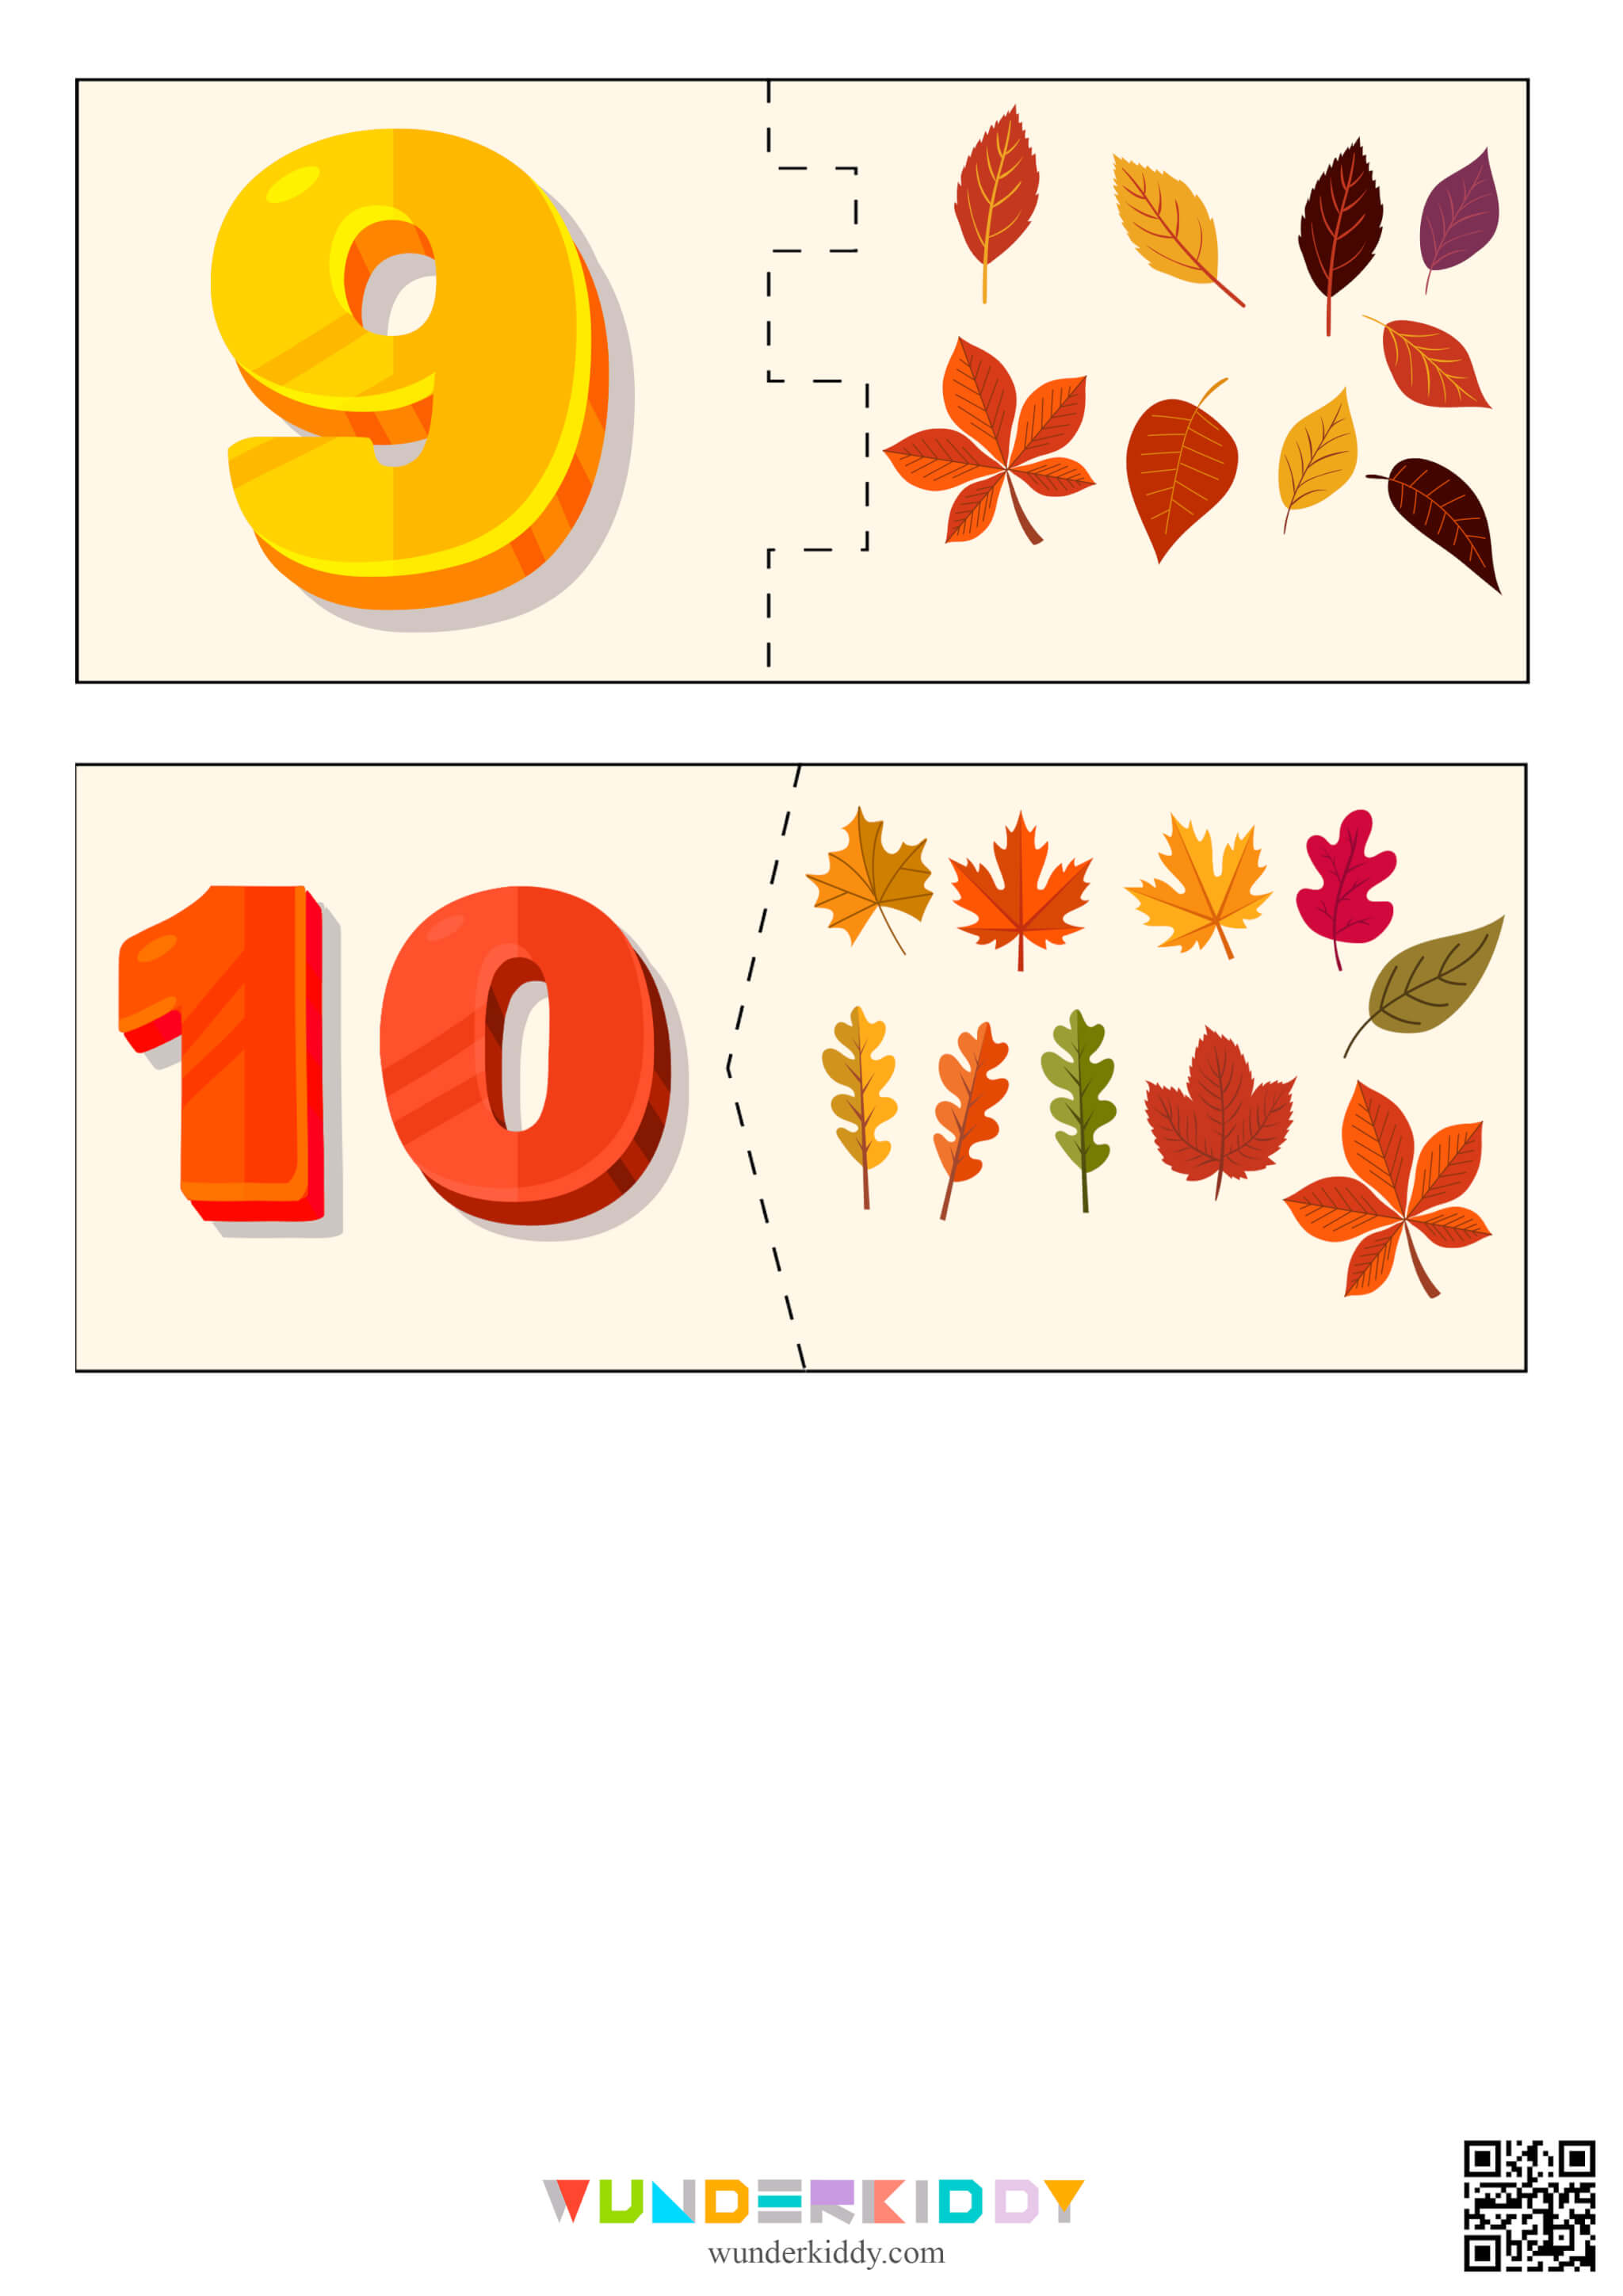 Flash cards «Counting leaves» - Image 5